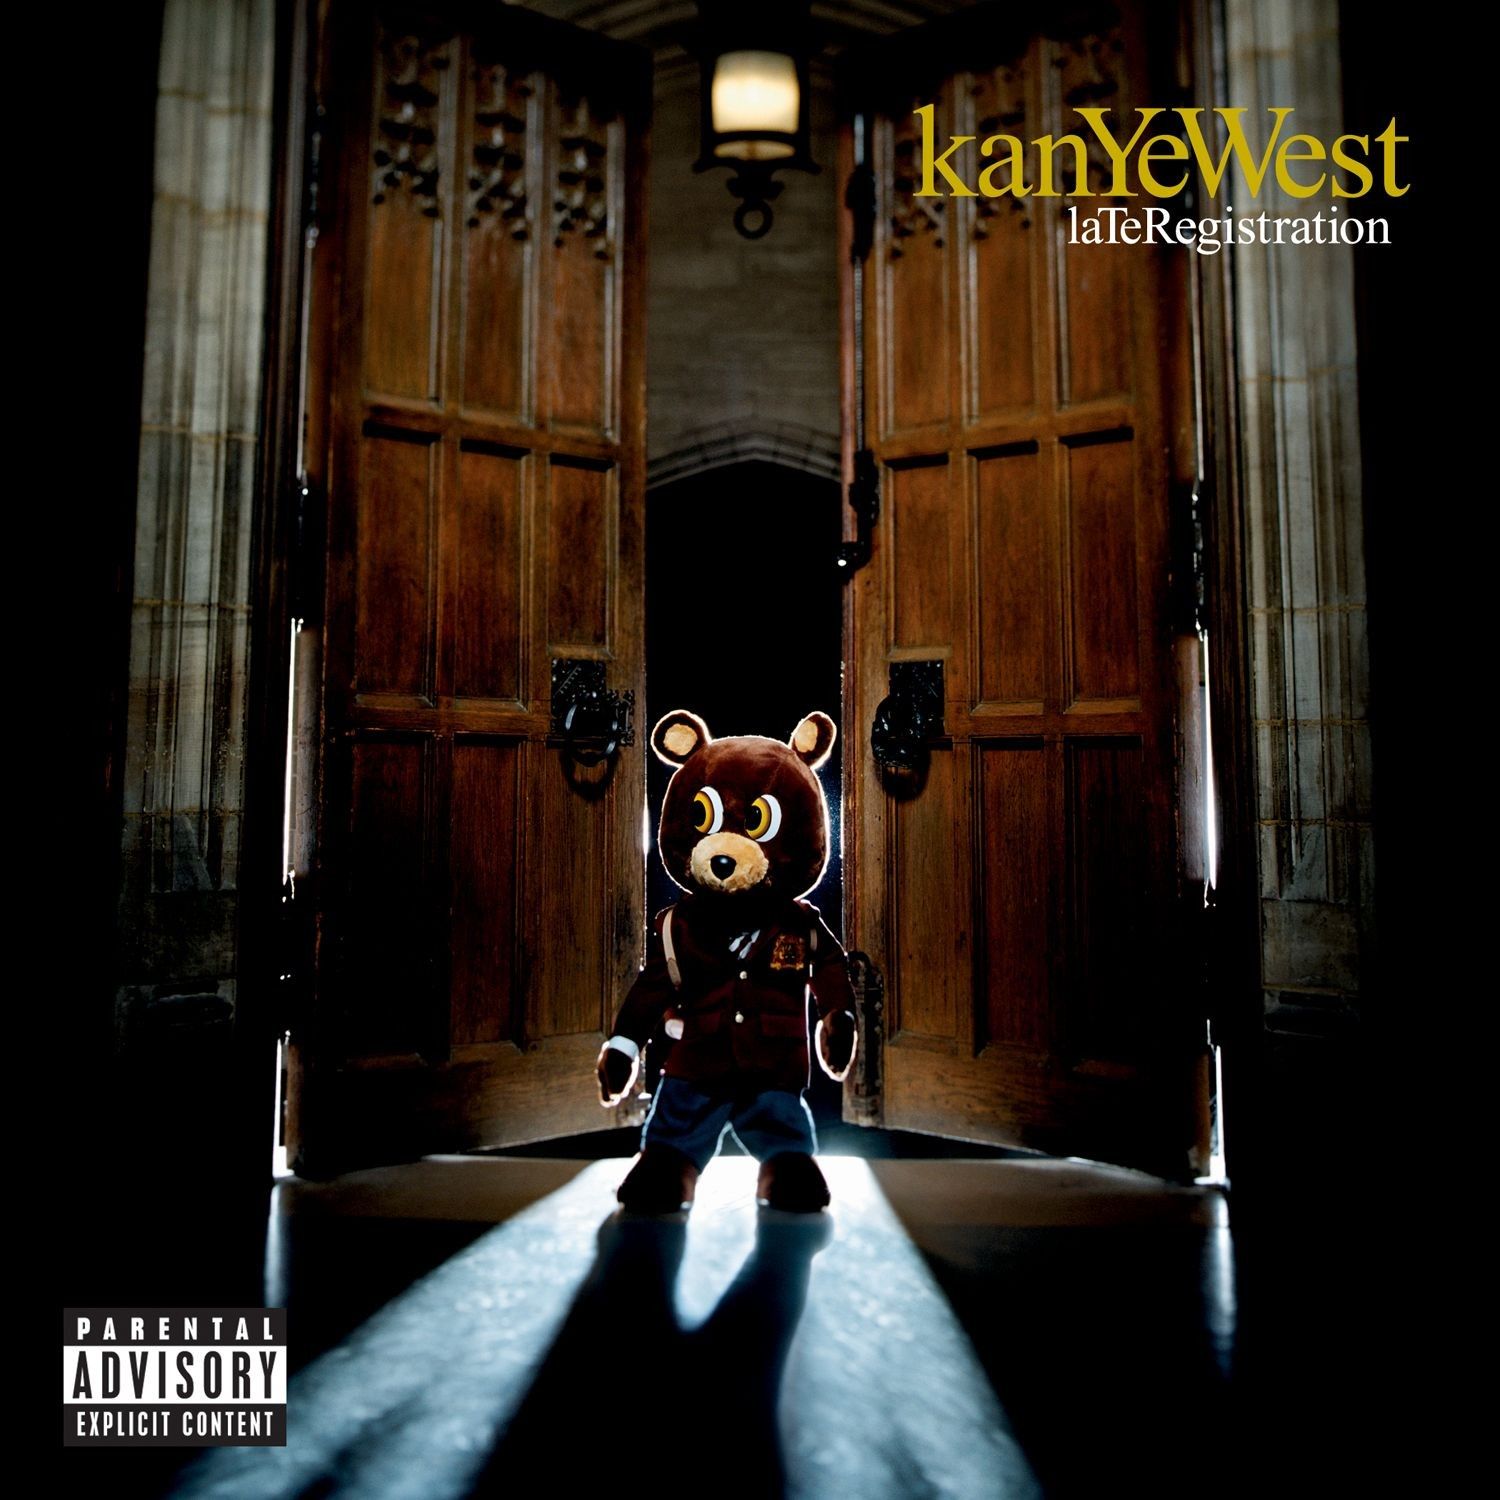 The album cover for Kanye West's Late Registration